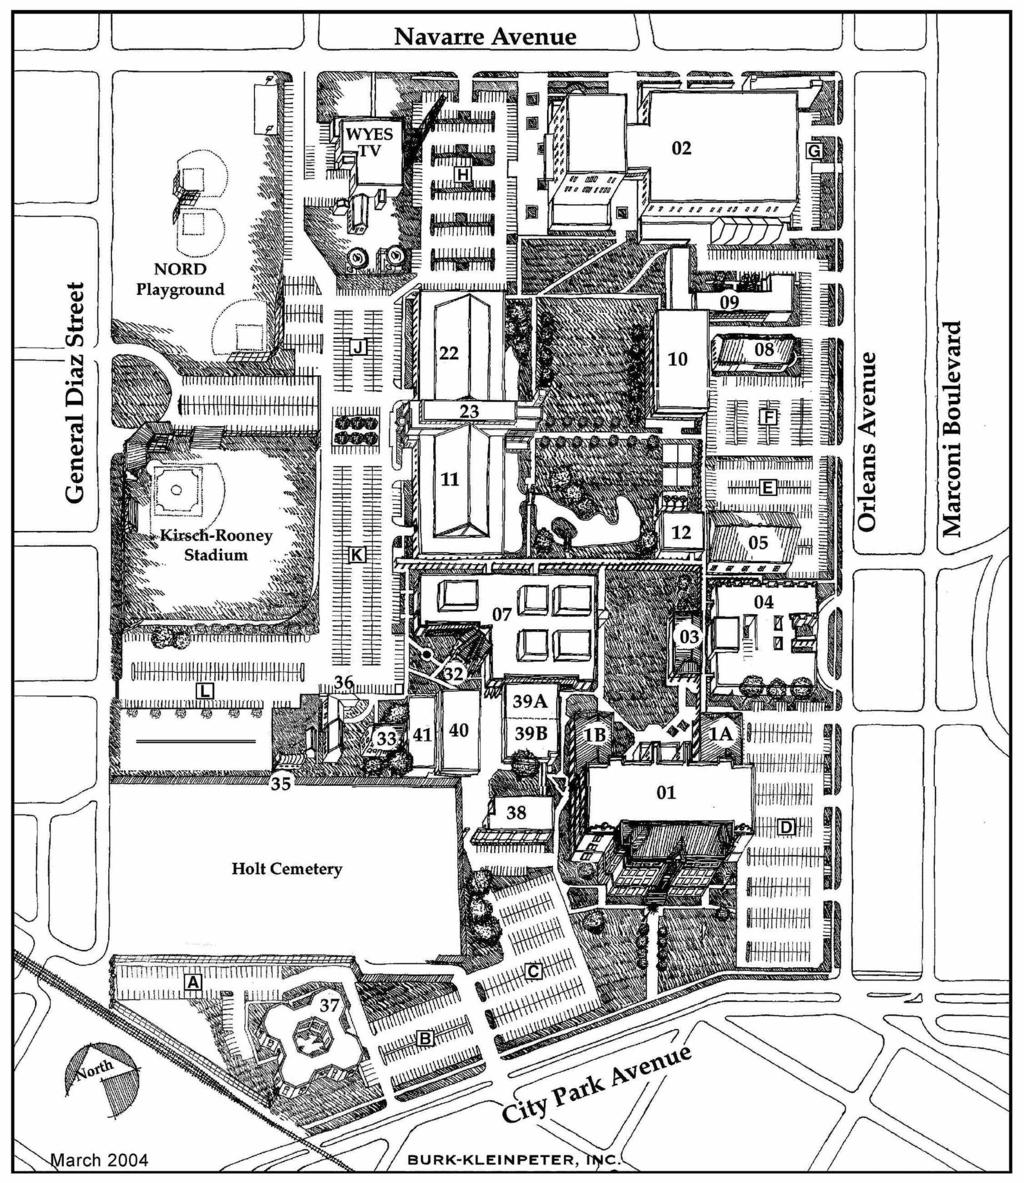 CAMPUS MAPS City Park Campus 01 1A 1B 03 04 06 07 08 11 12 14 22 23 25 35 37 38 39B 40 41 Isaac Delgado Hall Fitness Center Campus Police Bookstore Weiss Rehabilitation Center Engine